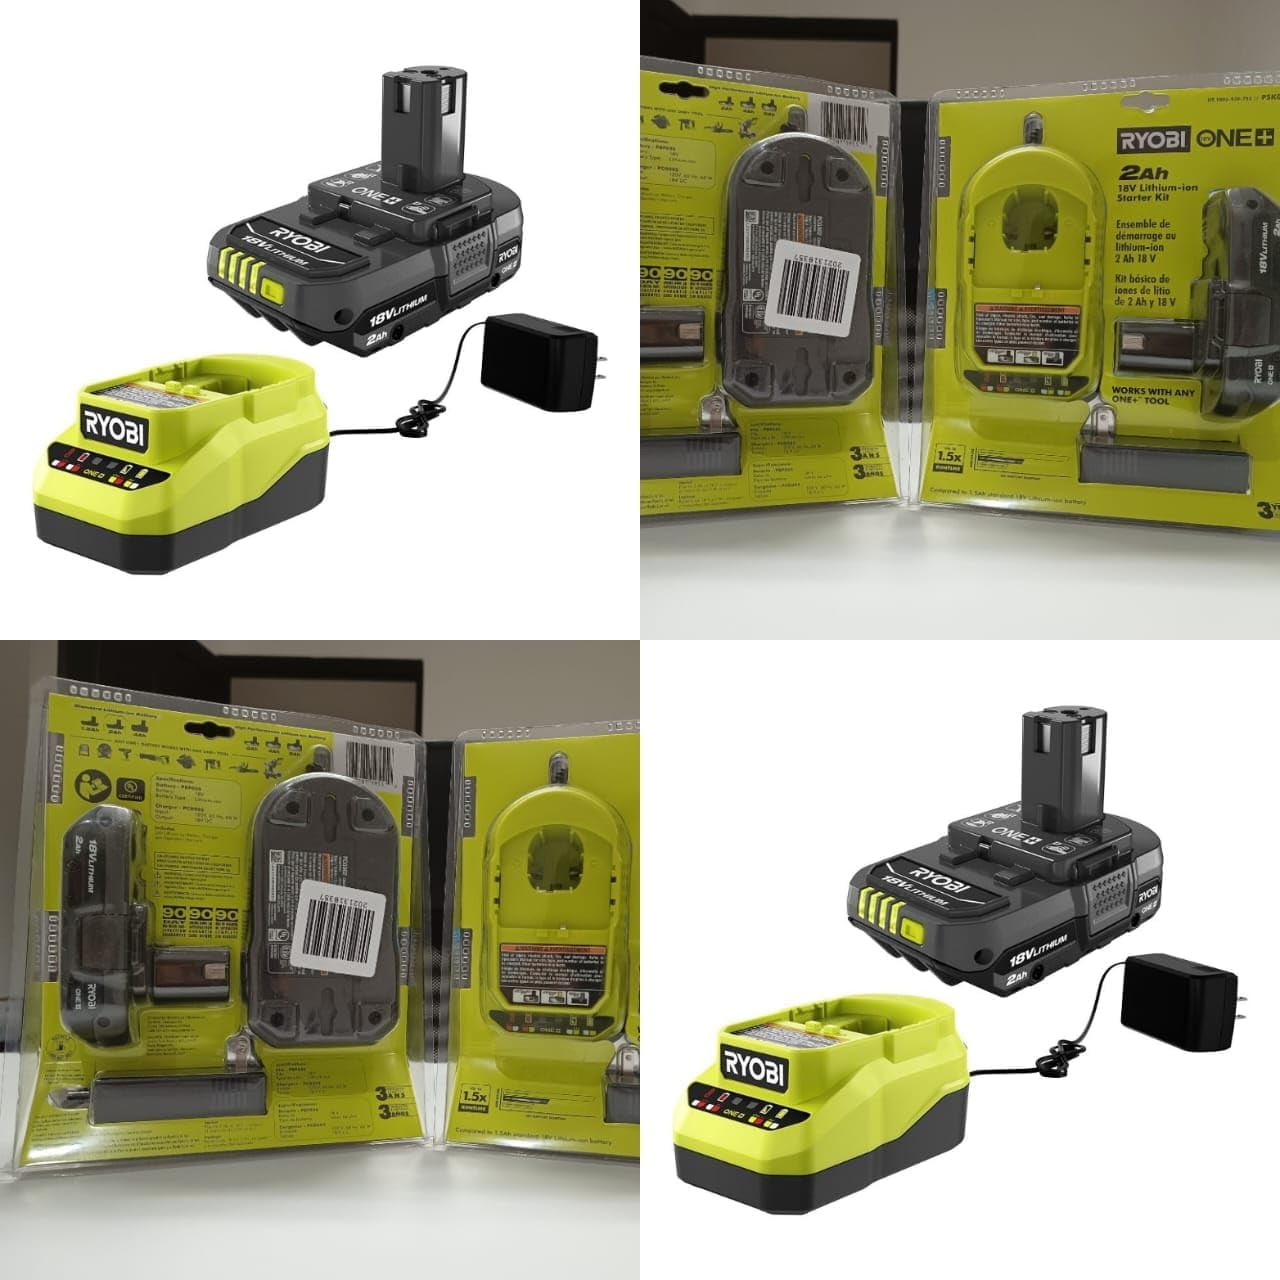 RYOBI ONE+ 18V Lithium-Ion 2.0 Ah Compact Battery and Charger Starter Kit 